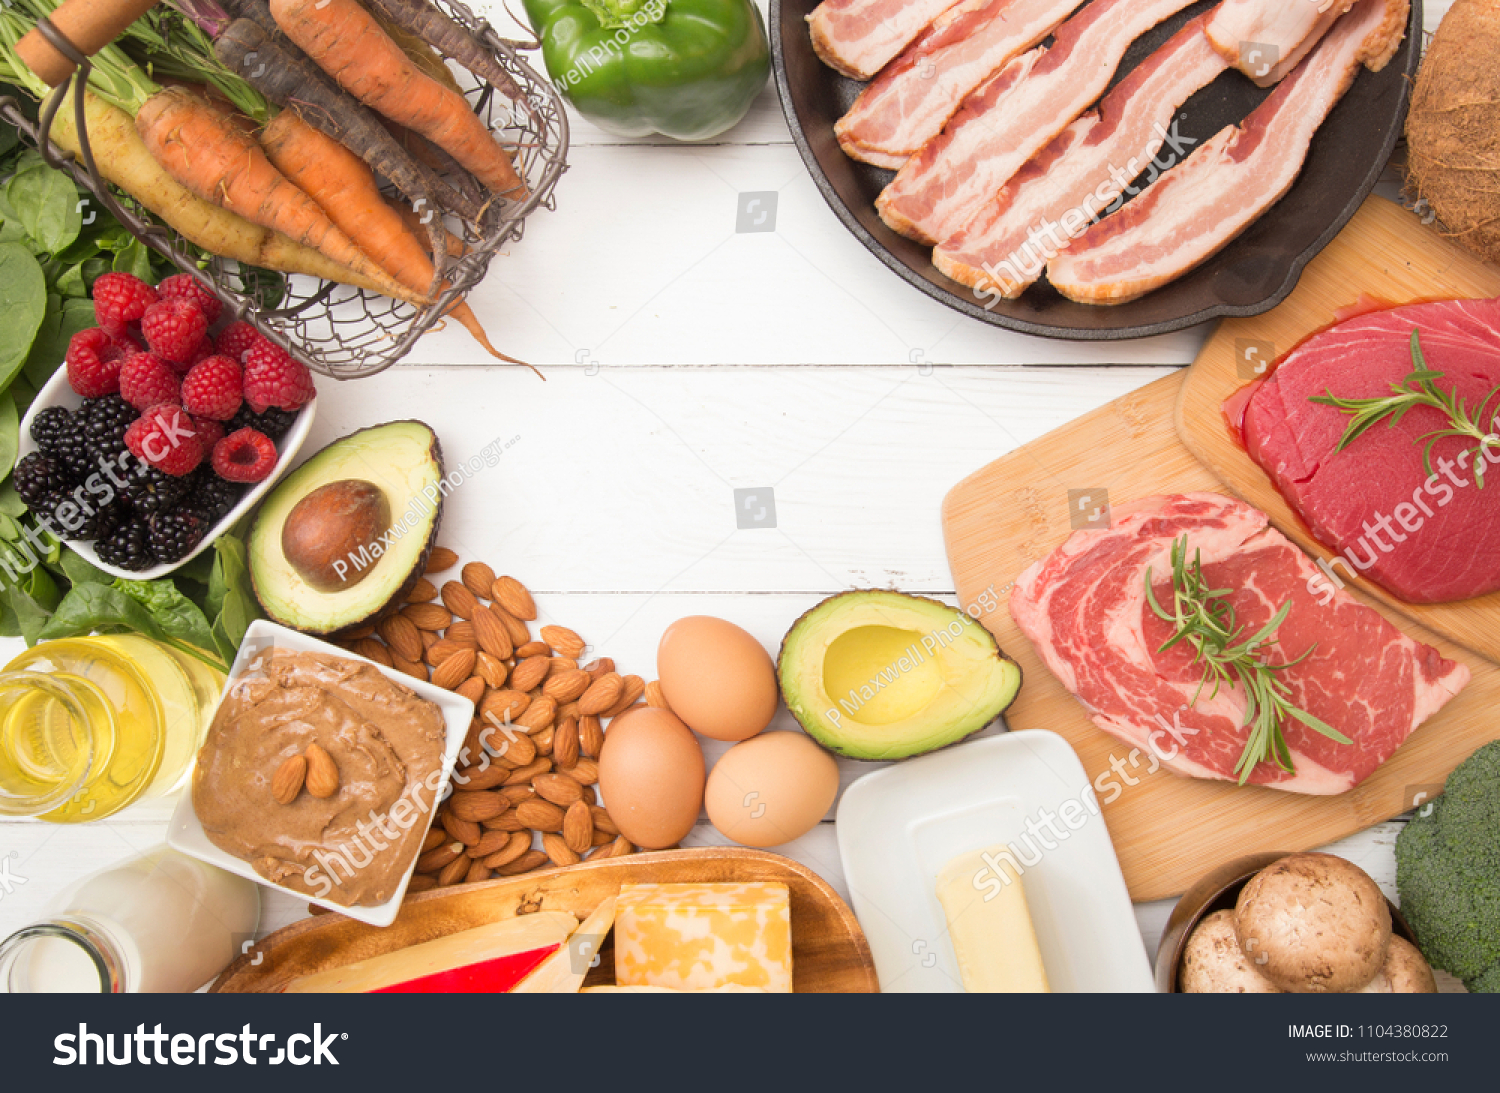 Various Foods that are Perfect for High Fat, Low Carb Diets such as Keto #1104380822